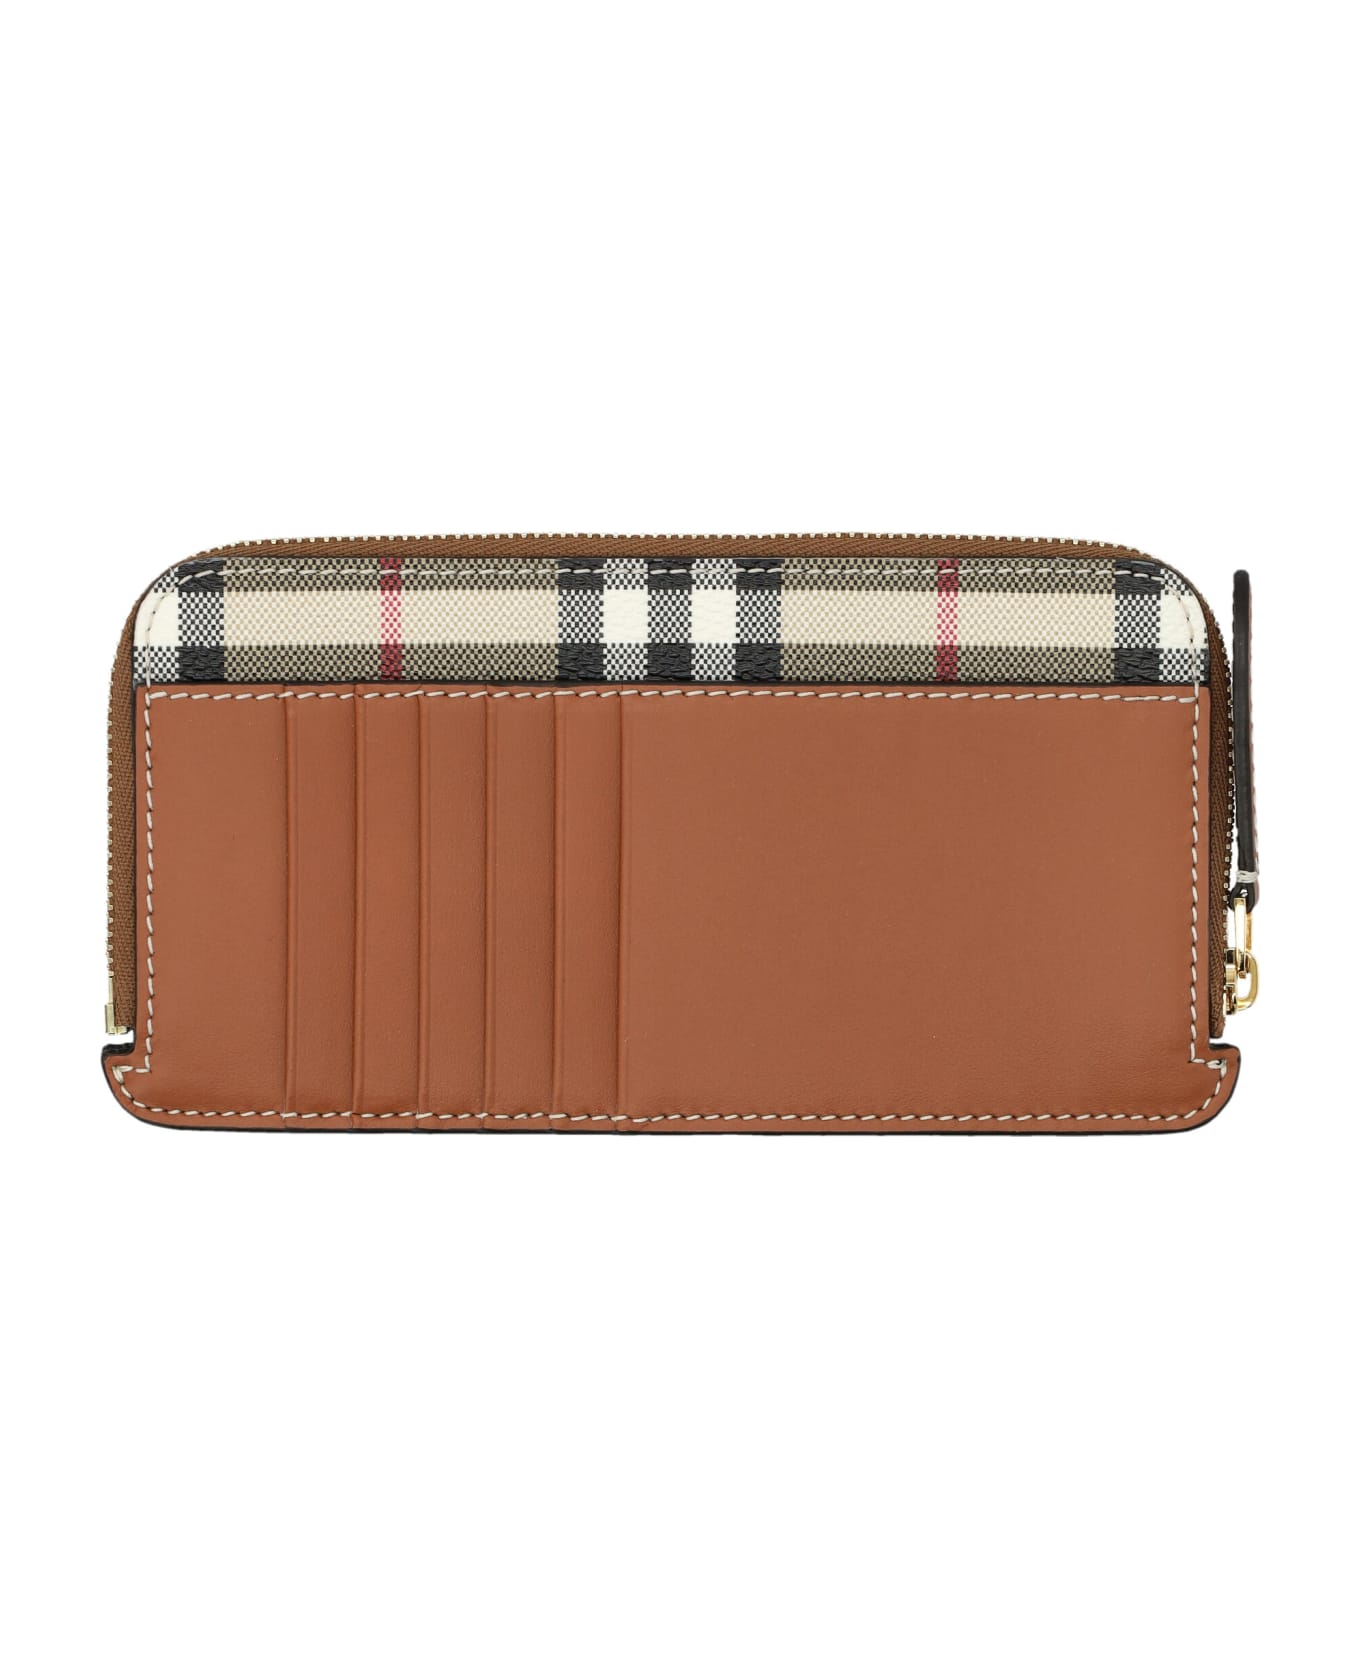 Burberry London Long Somerset Wallet - ARCHIVE BEIGE CHECK 財布